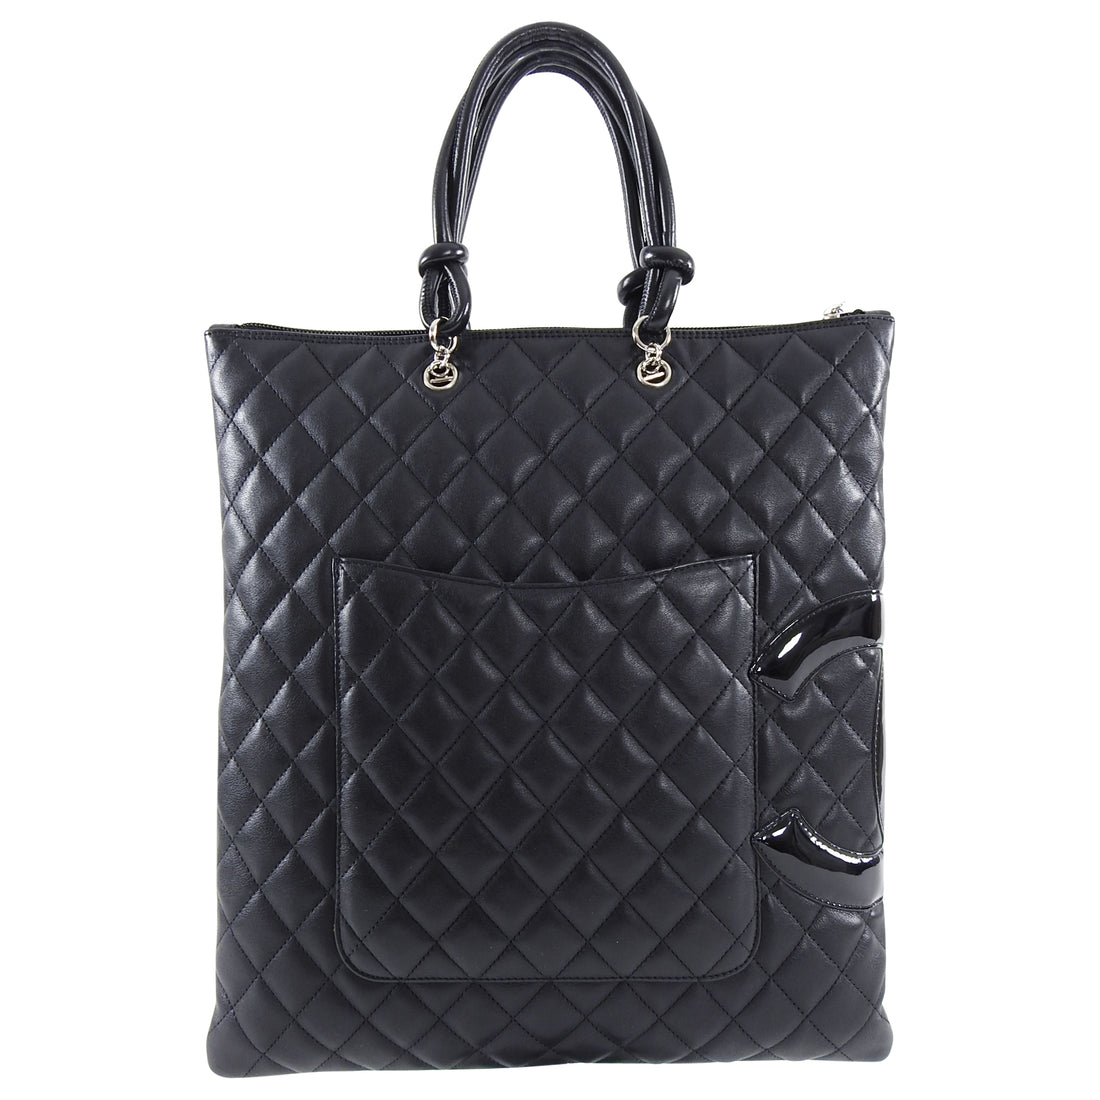 Chanel 2005 Black Quilted Ligne Cambon CC Small Tote Bag